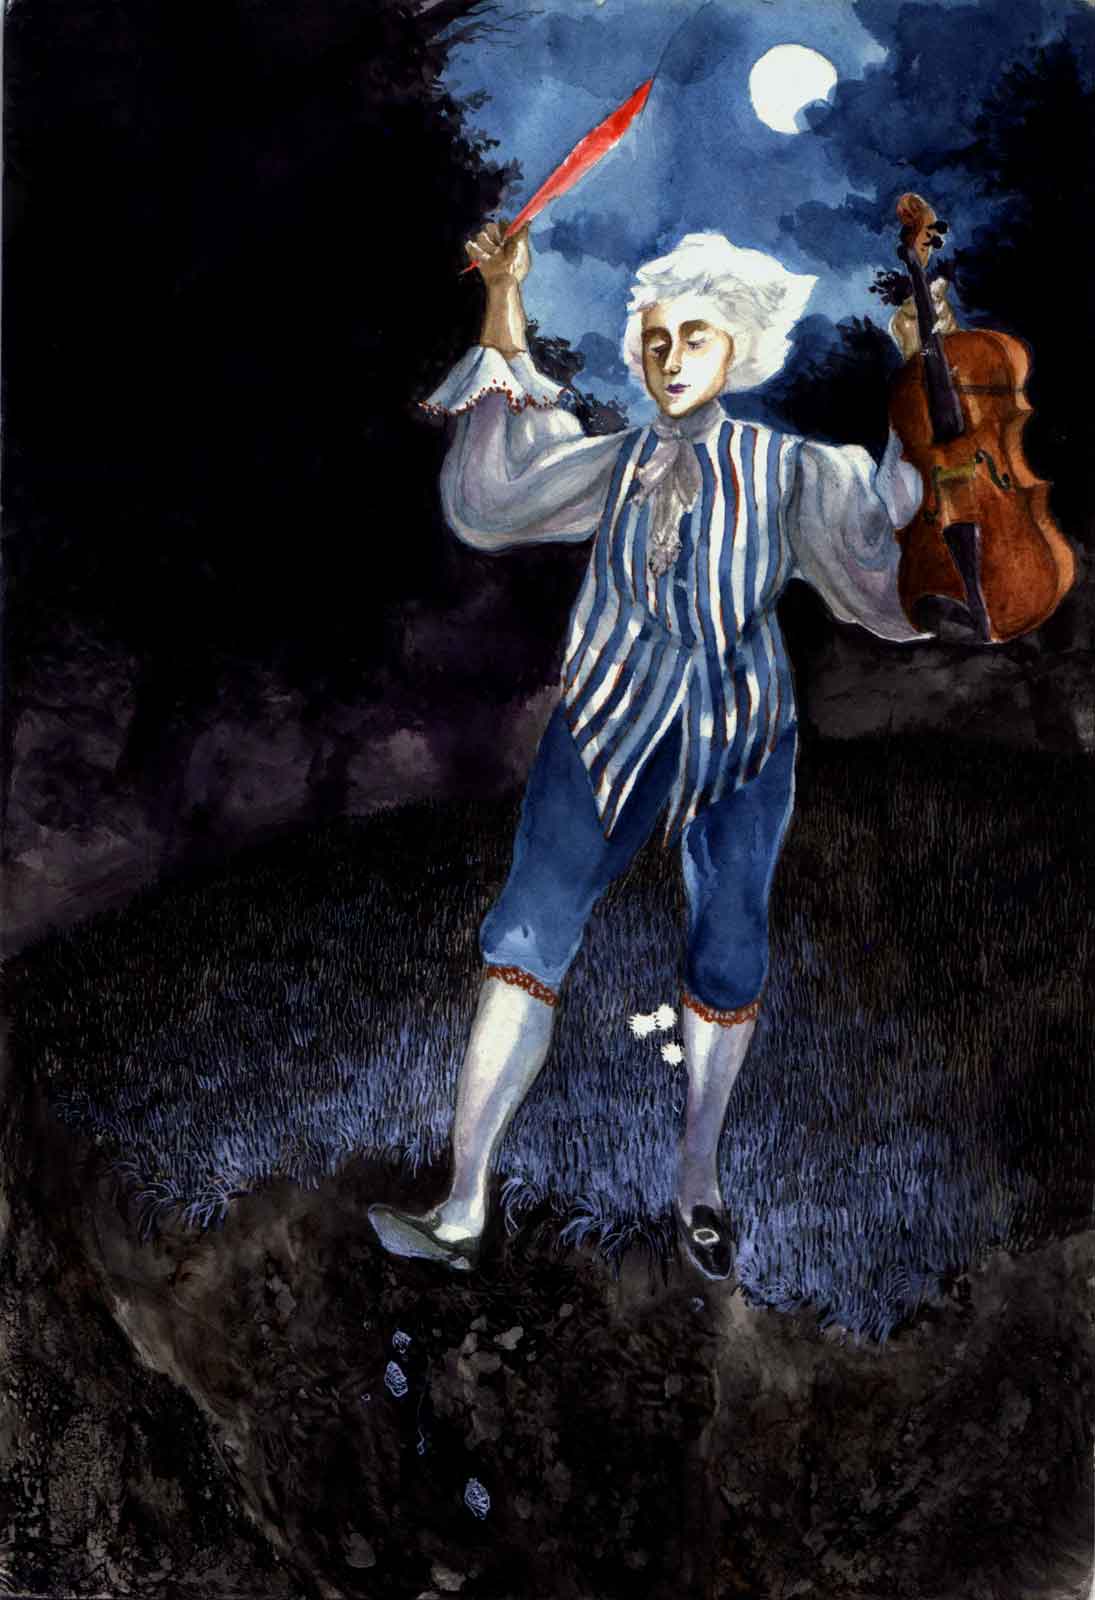 At night, a fiddler is so enthralled by music that a fall is unavoidable.